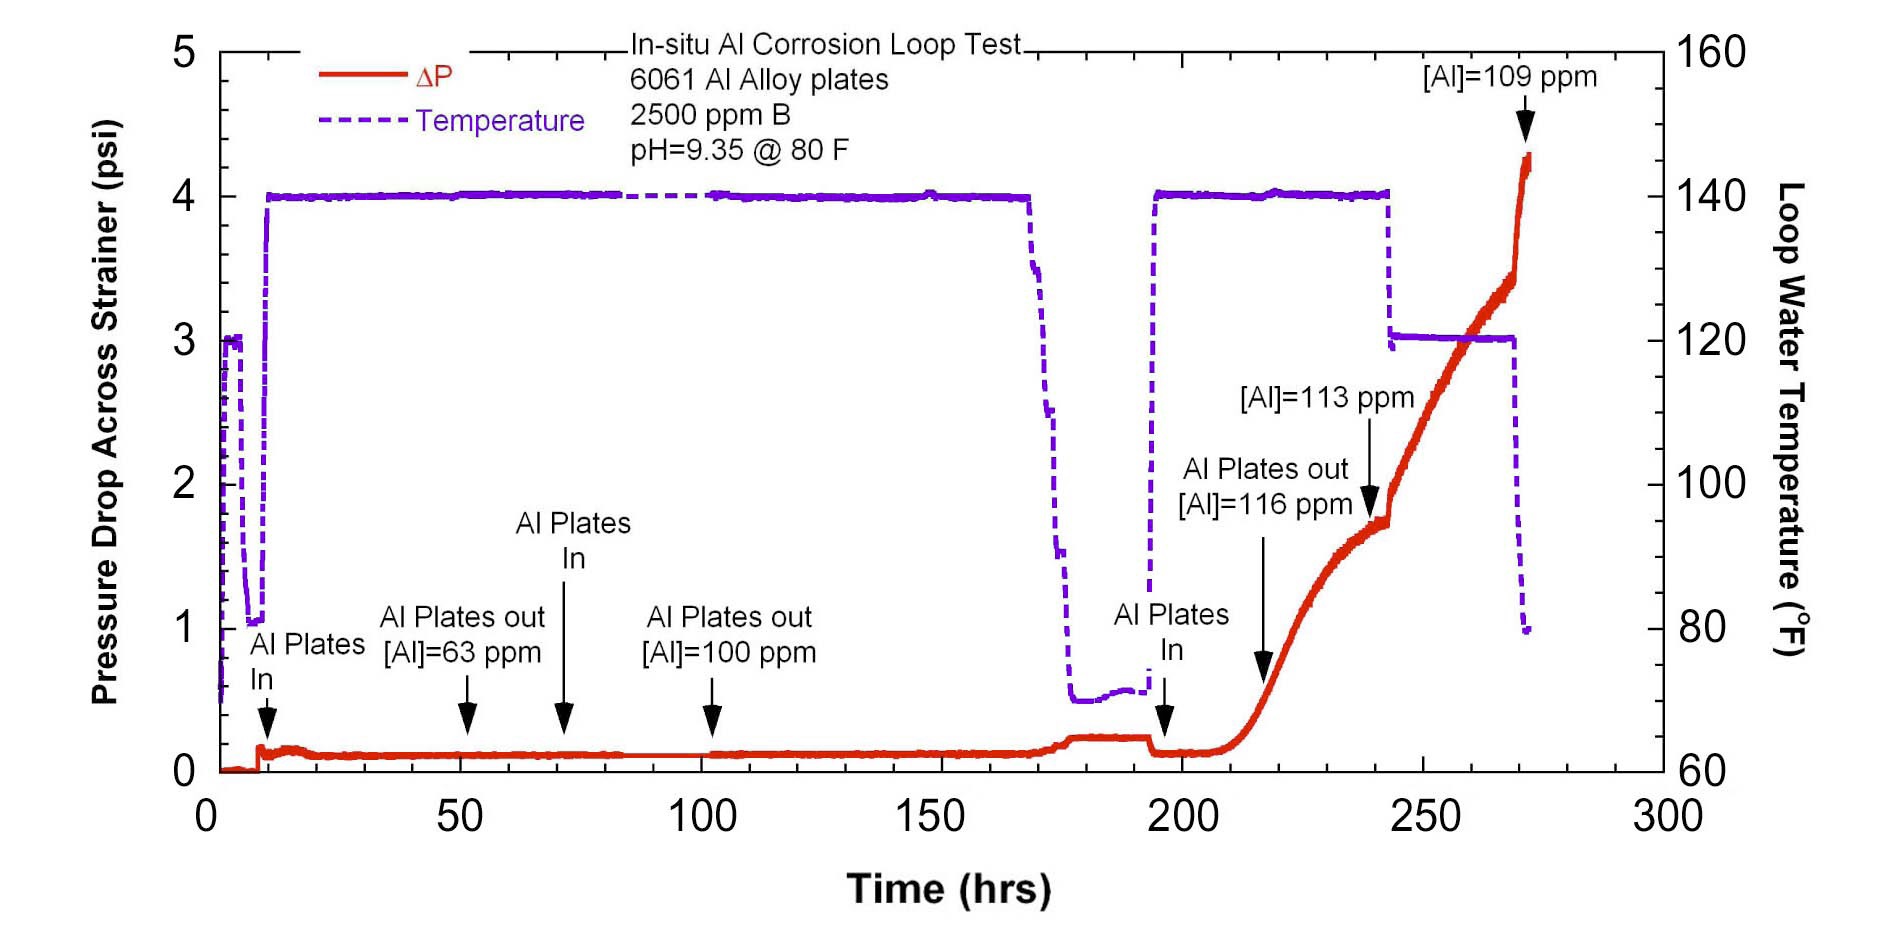 Pressure Drop and Loop Water Temperature vs. Test Time using 6061 Al Plates with 2500 ppm B, Initial pH=9.35 Solution, and Temperature of 80℉ [27]. 1 psi=6.895 kPa.